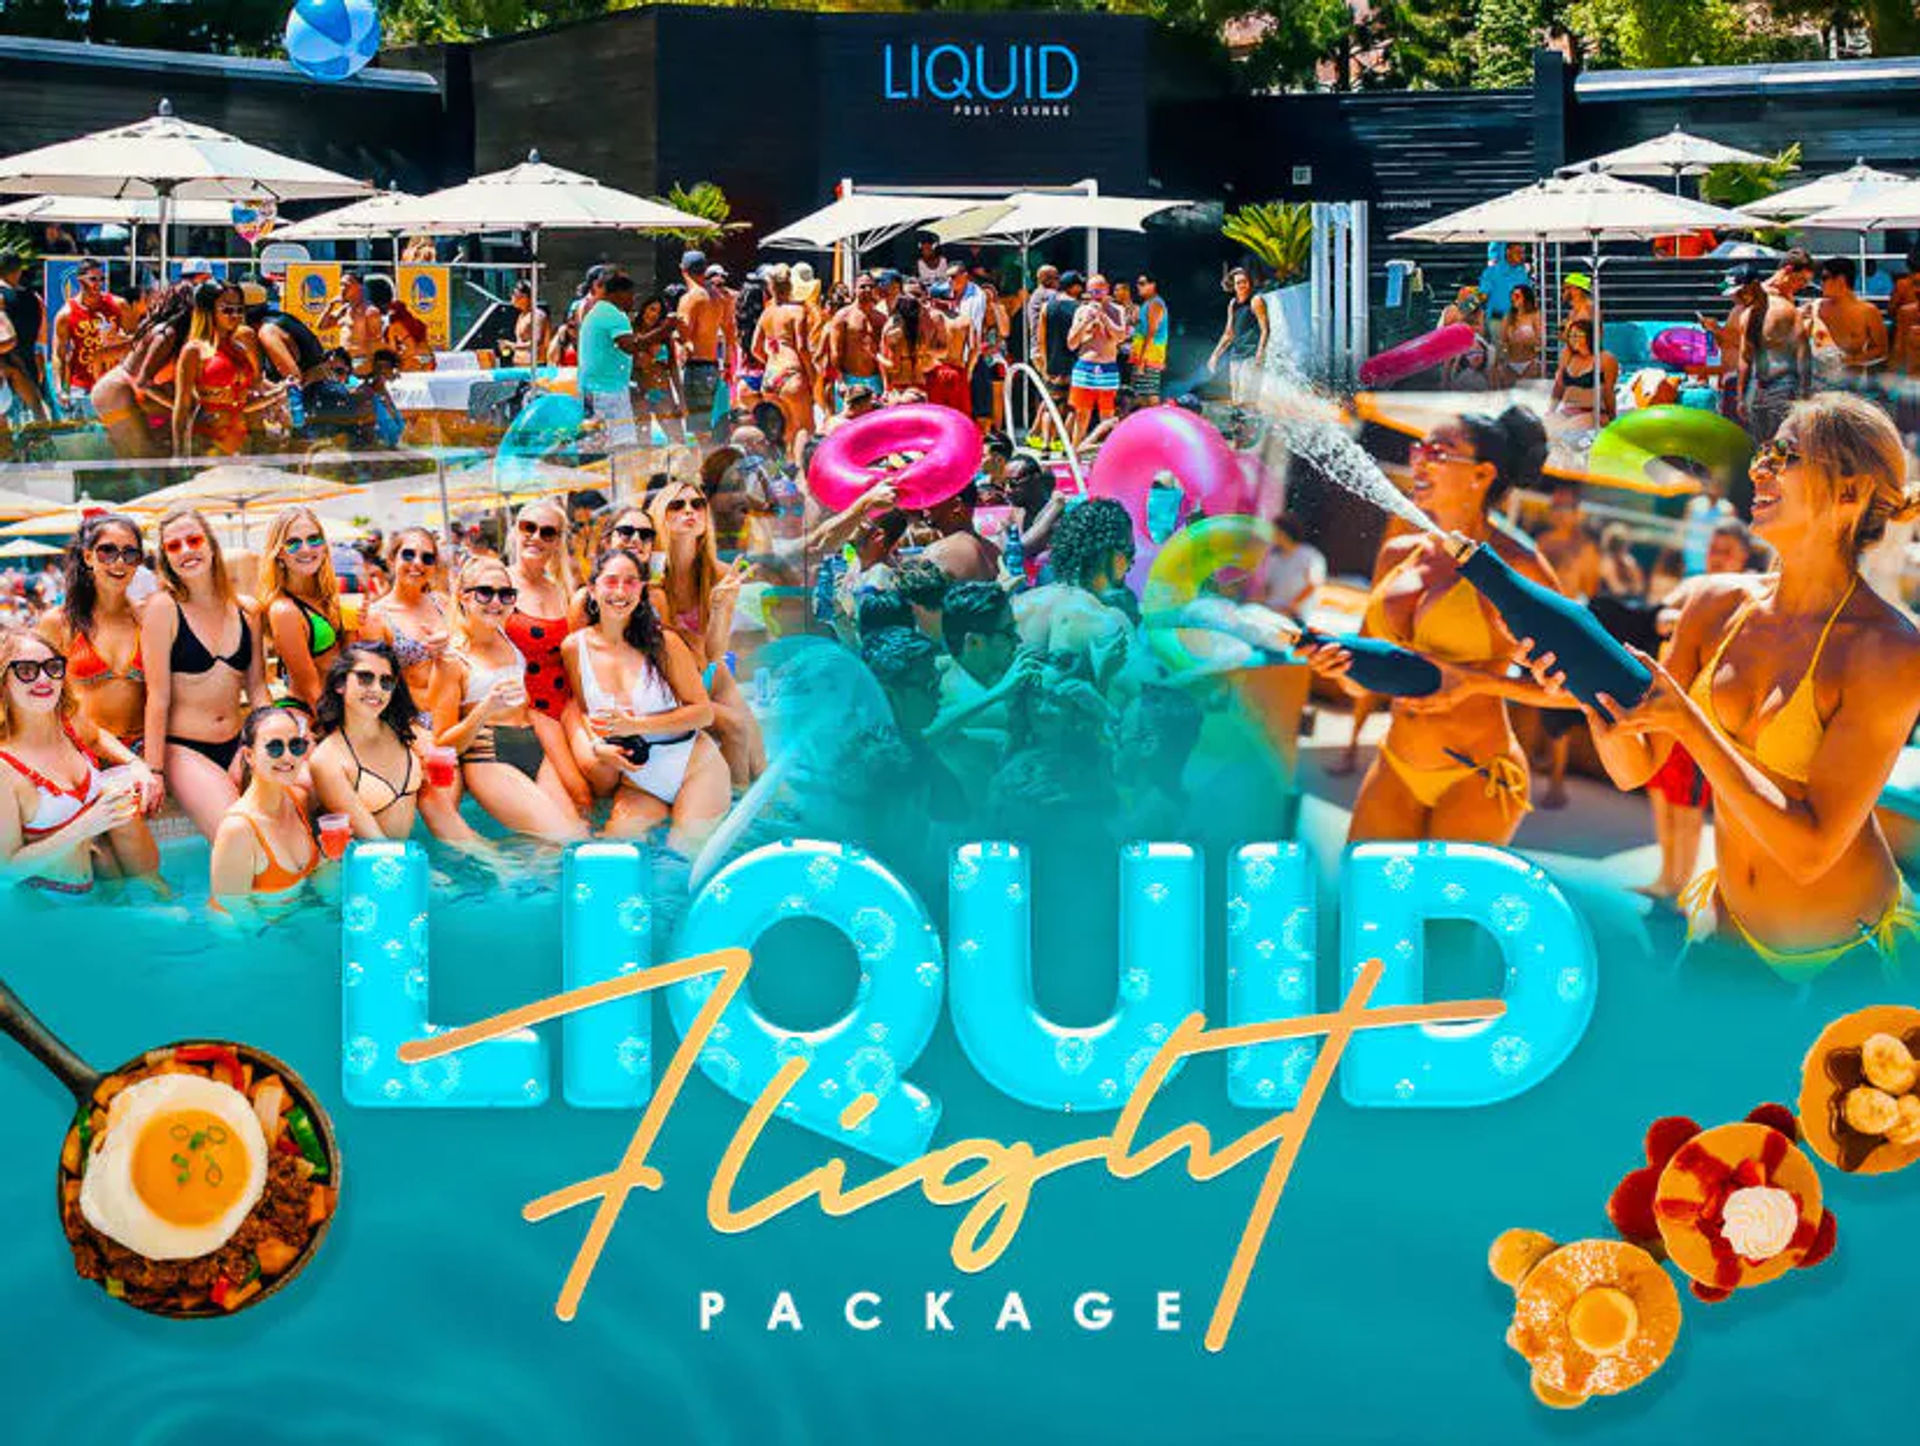 Brunch at FLIGHTS & Pool Party at LIQUID with Limo Pickup, Open Bar Hour and more image 1